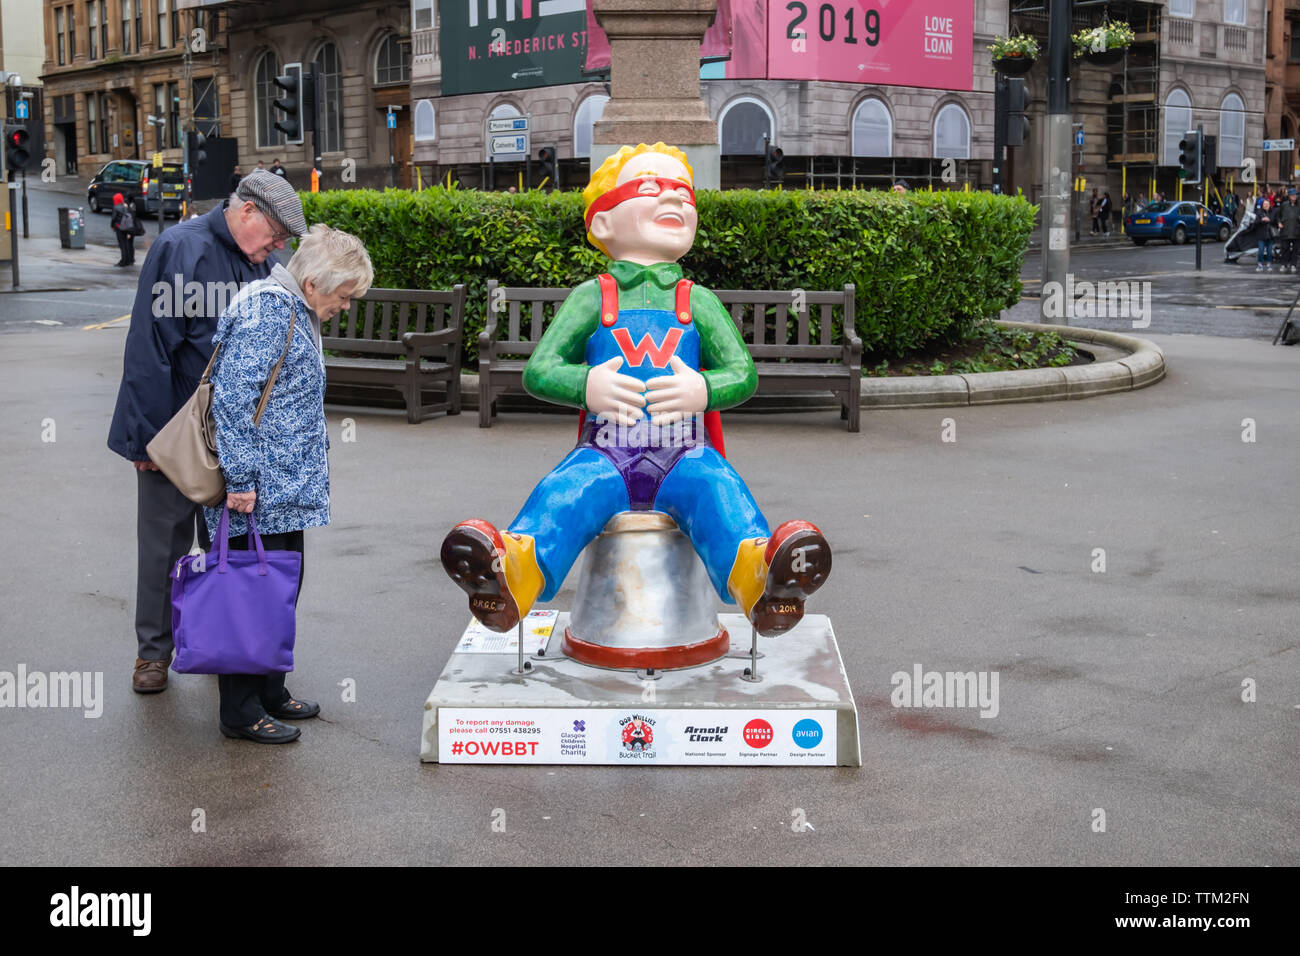 Glasgow, Scotland, UK. 17th June, 2019. Wonder Wullie, created by David RG Chapman. This statue sees Oor Wullie armed with an old curtain, dishcloth and Paw's Y-fronts. Oor hero's oot guisin' as Wonder Wullie. The sculpture is part of Oor Wullie’s BIG Bucket Trail. Credit: Skully/Alamy Live News Stock Photo